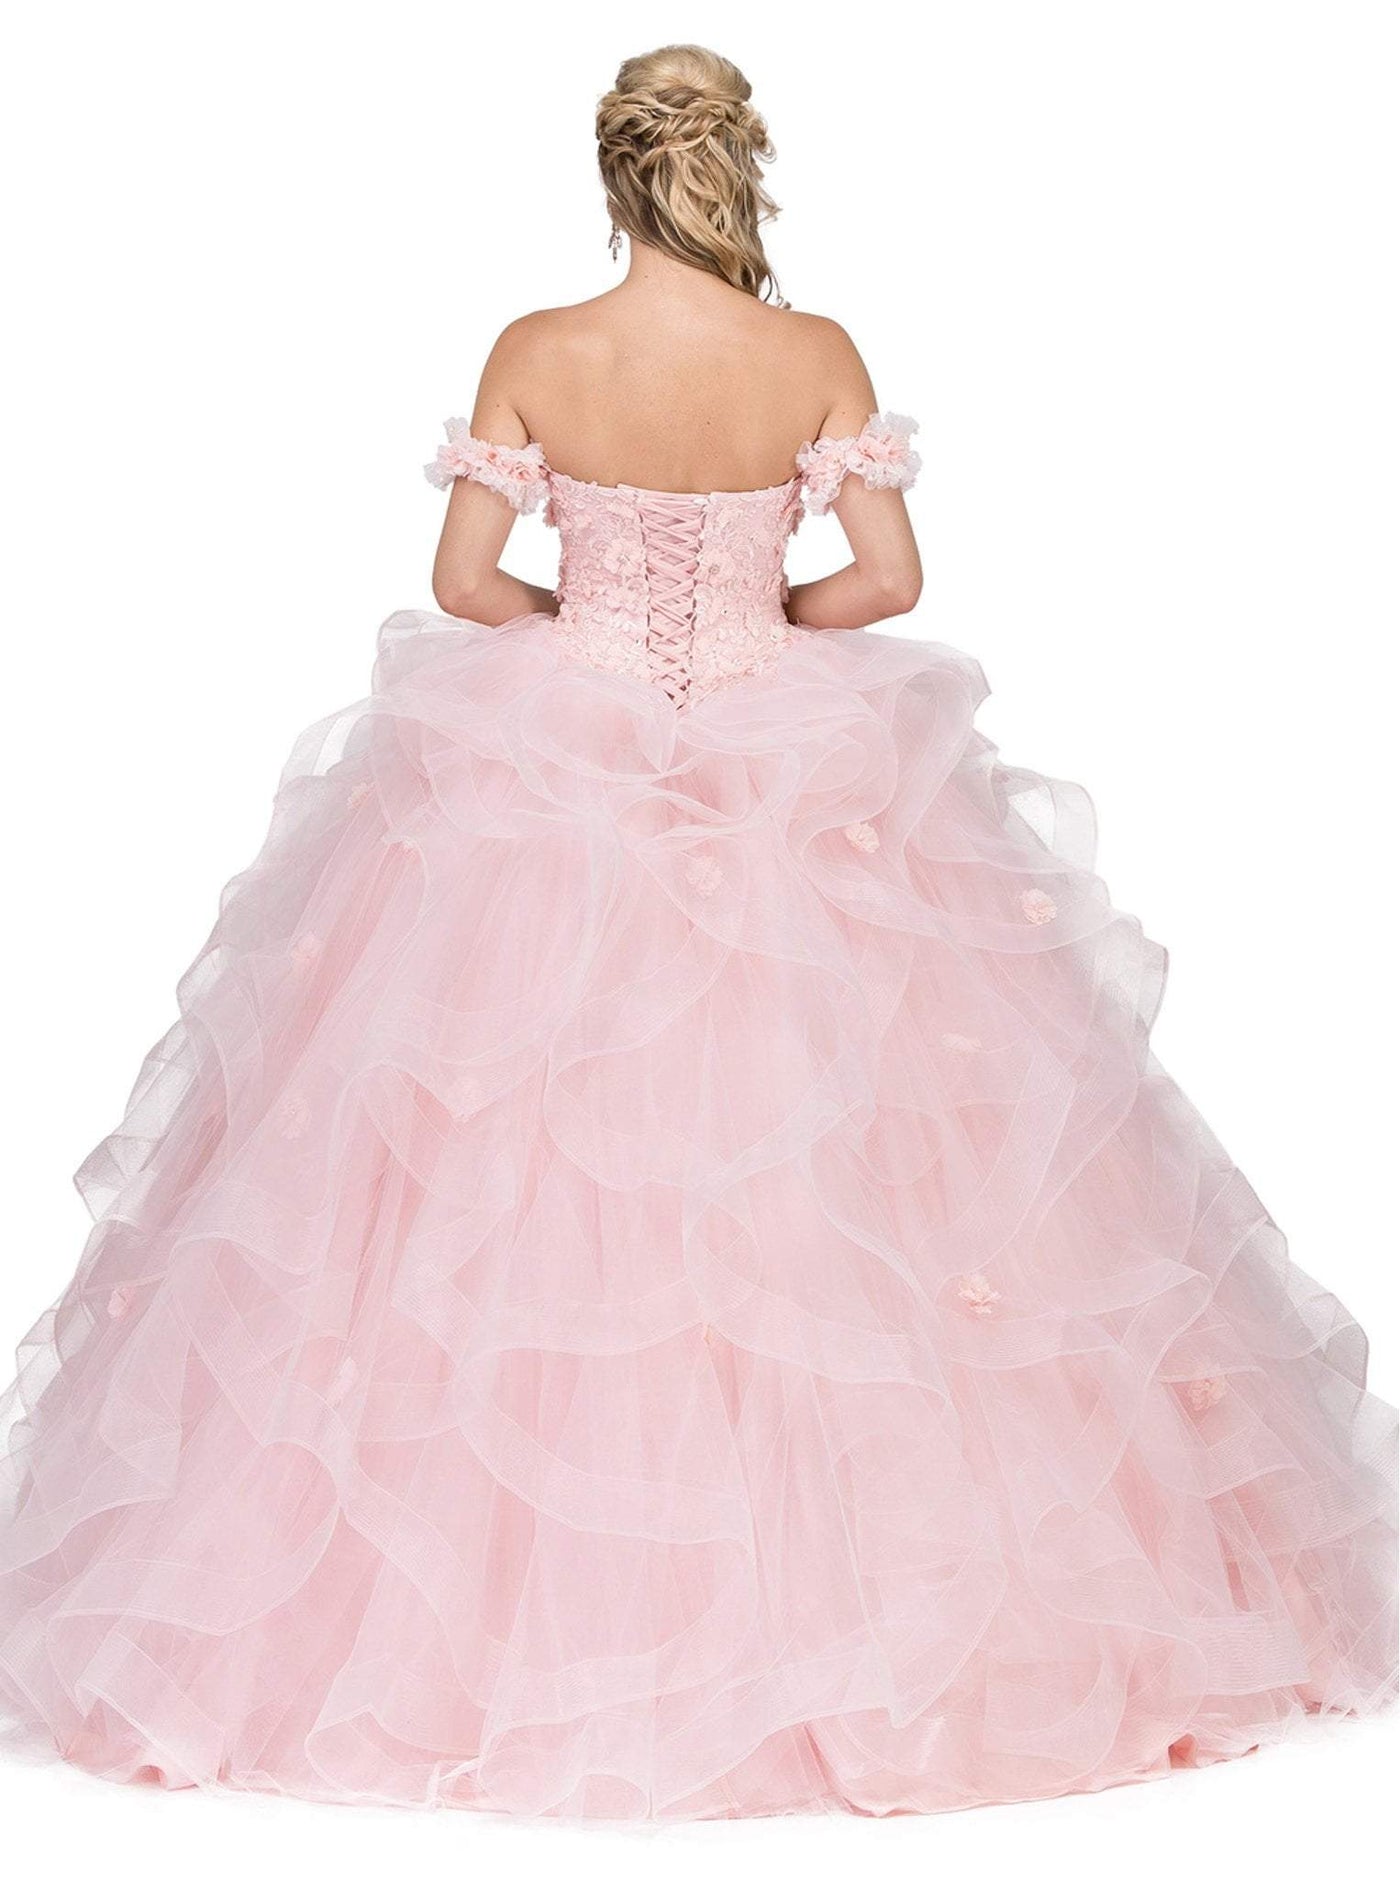 Dancing Queen - 1322 Floral Applique Ruffled Quinceanera Ballgown Special Occasion Dress